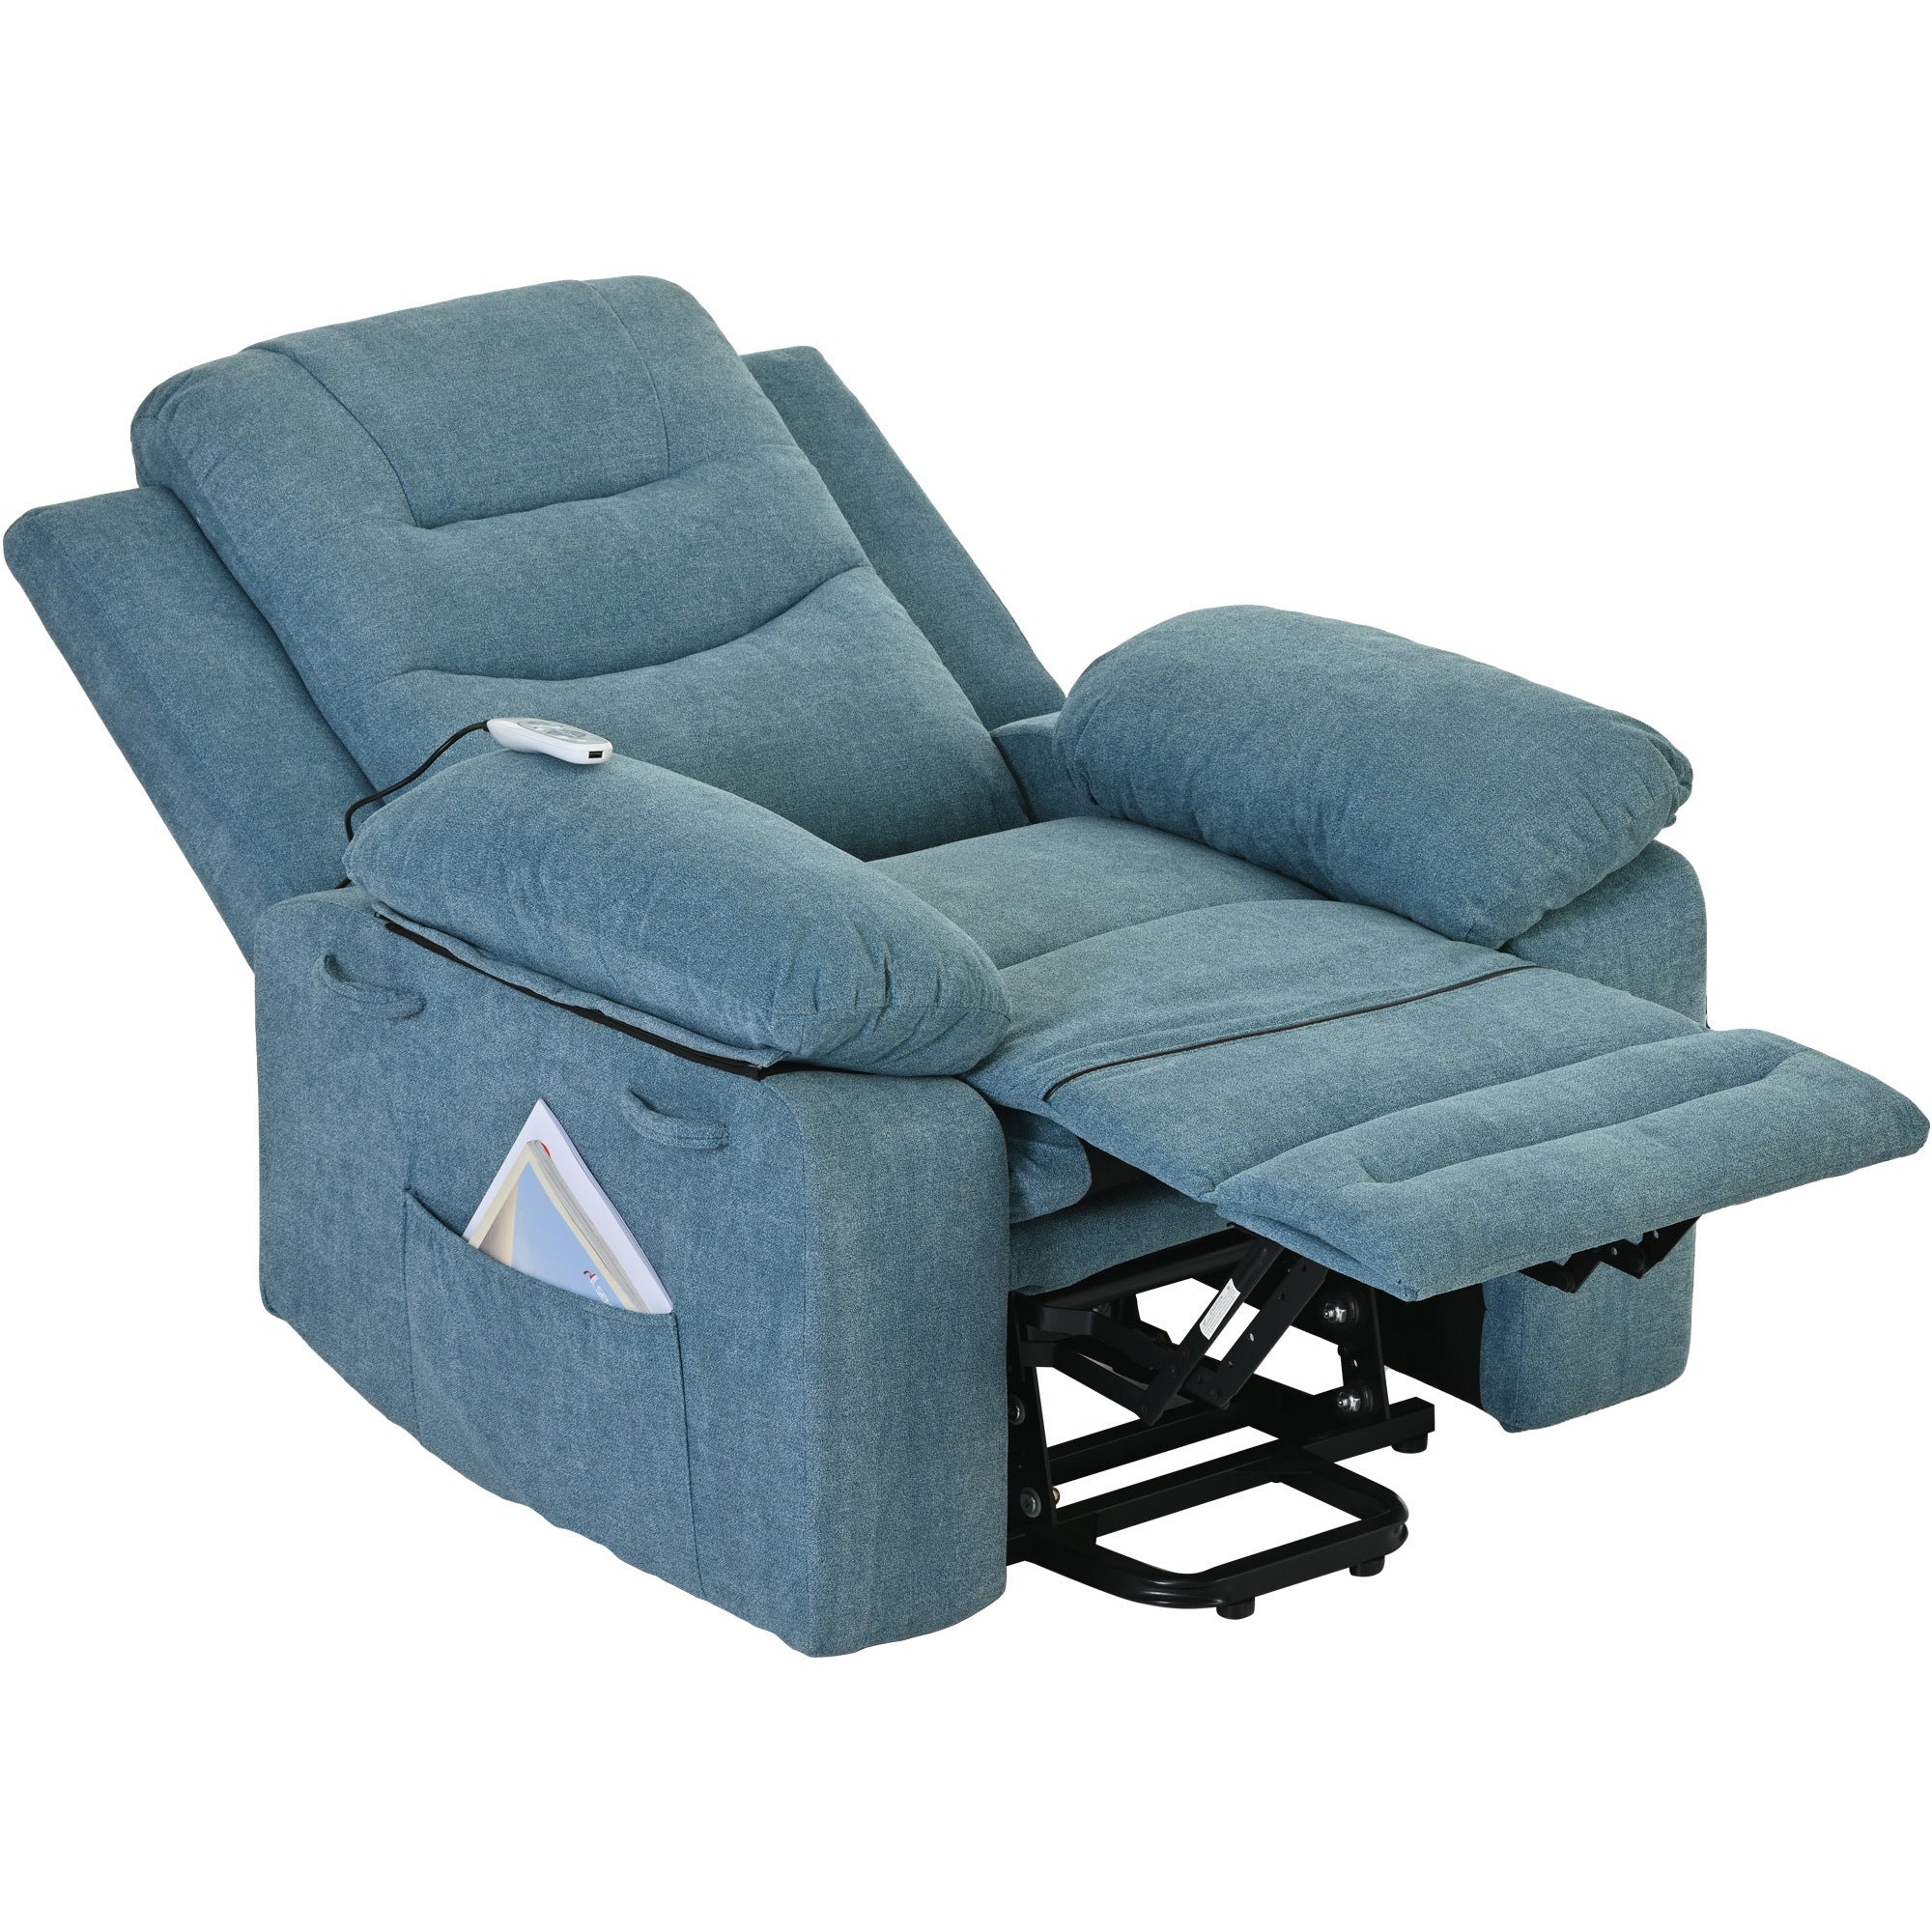 Blue Power Lift Chair 45 Degree Angle with headrest and footrest extended